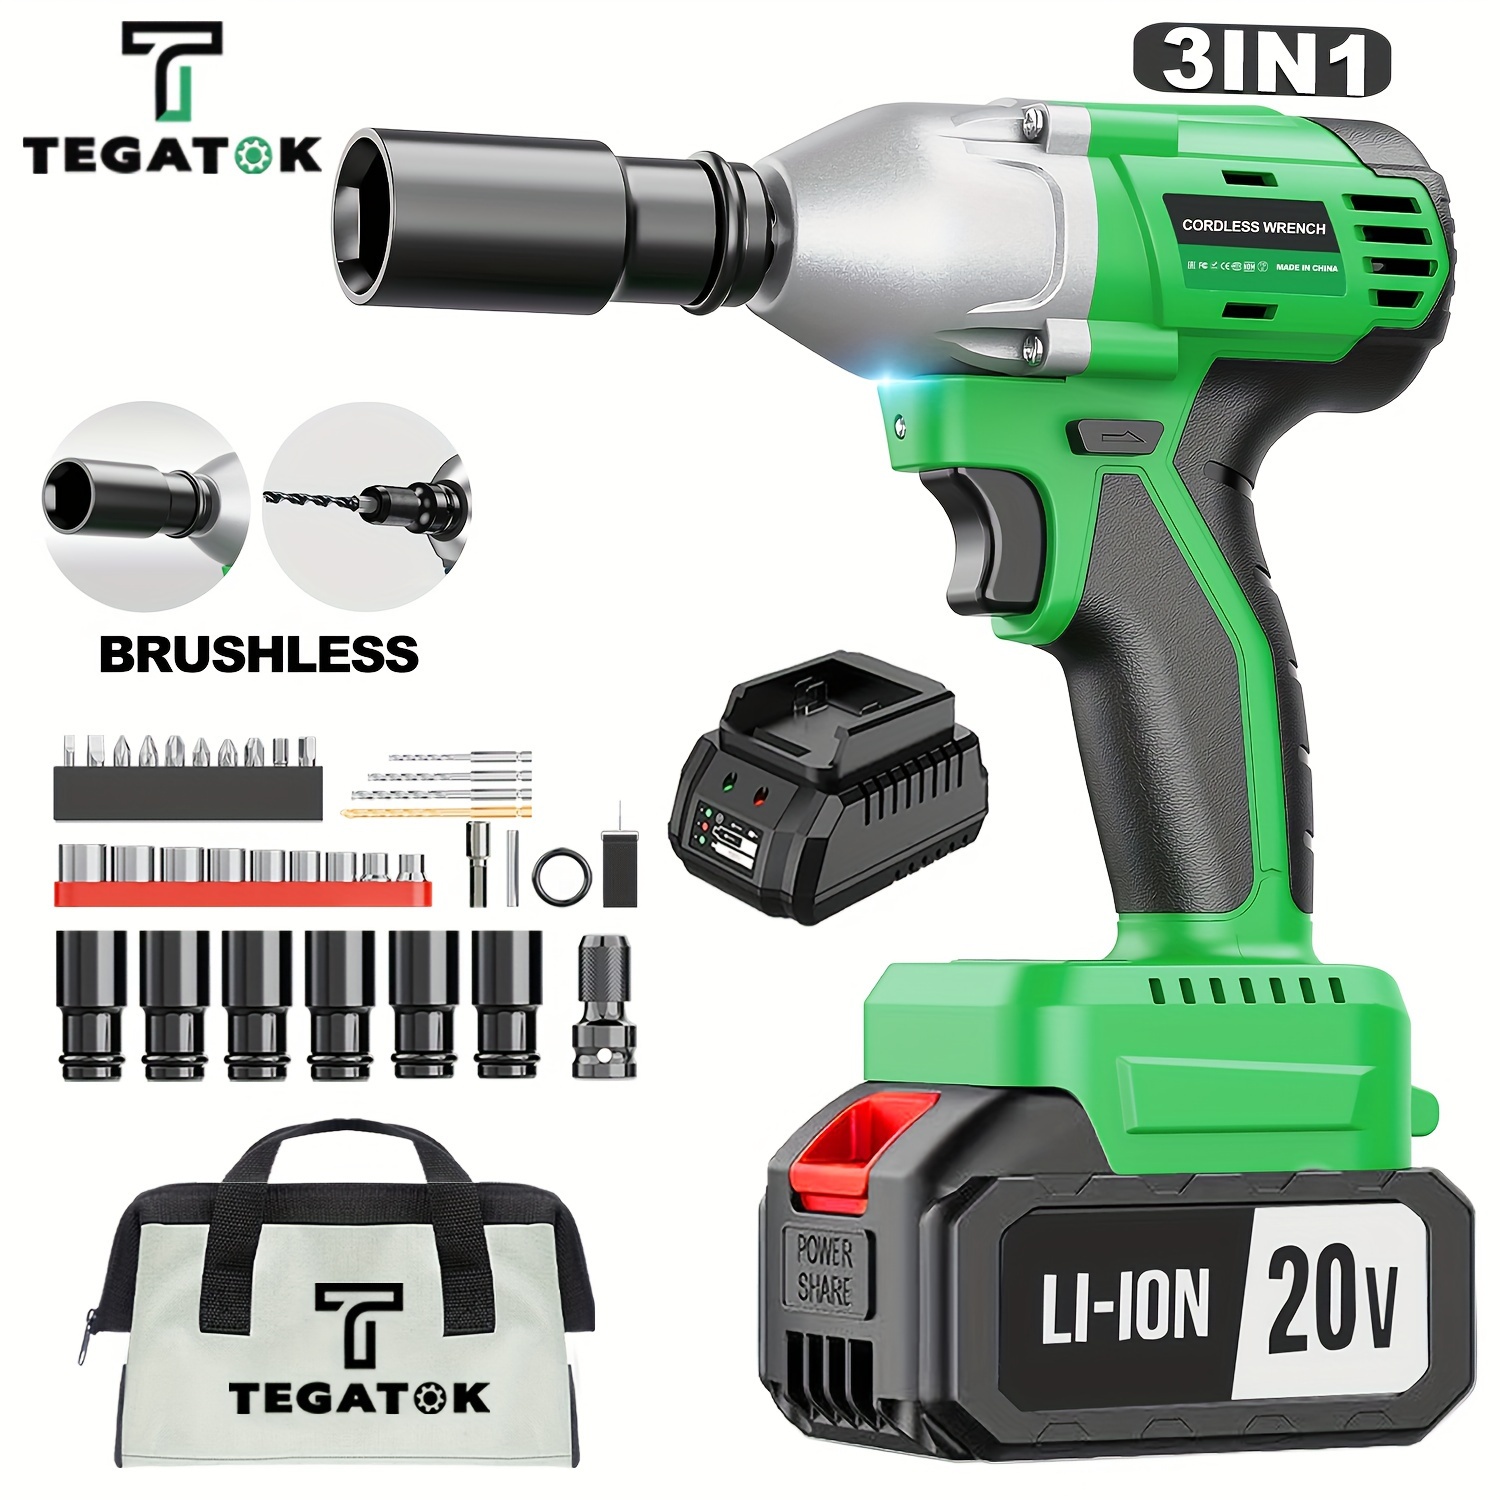 

Tegatok Cordless Impact Wrench, Power Impact 1/2 (430n.m), 2400 Rpm Brushless Impact Driver With 4000 Mah Battery, Fast Charger, 6 Sockets & Tool Bag, 3-in-1 Electric Impact Wrench For Car Home